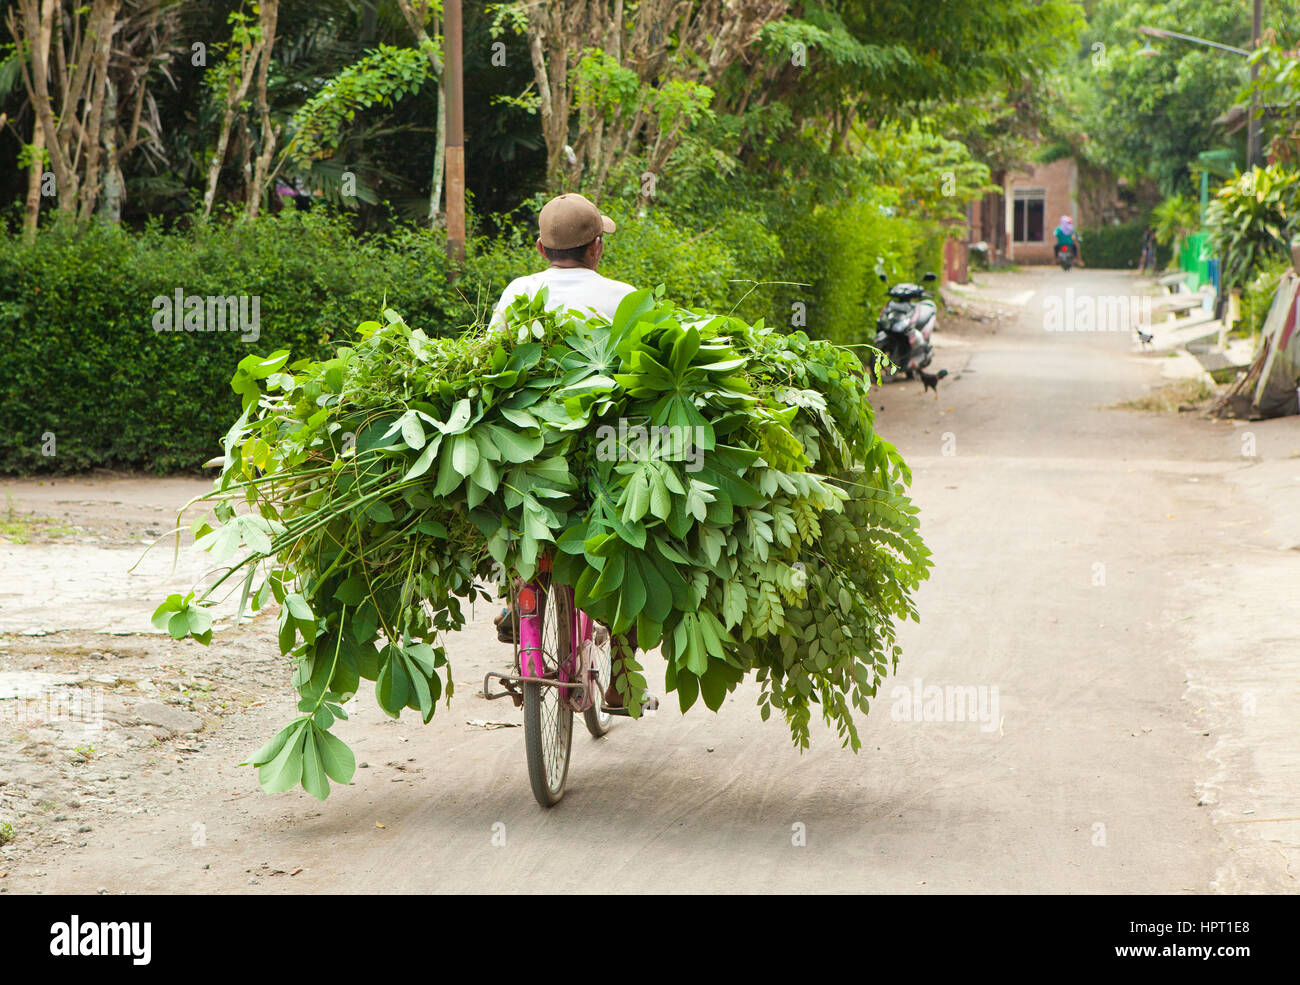 Man transporting his crop on a bicycle, Indonesia Stock Photo